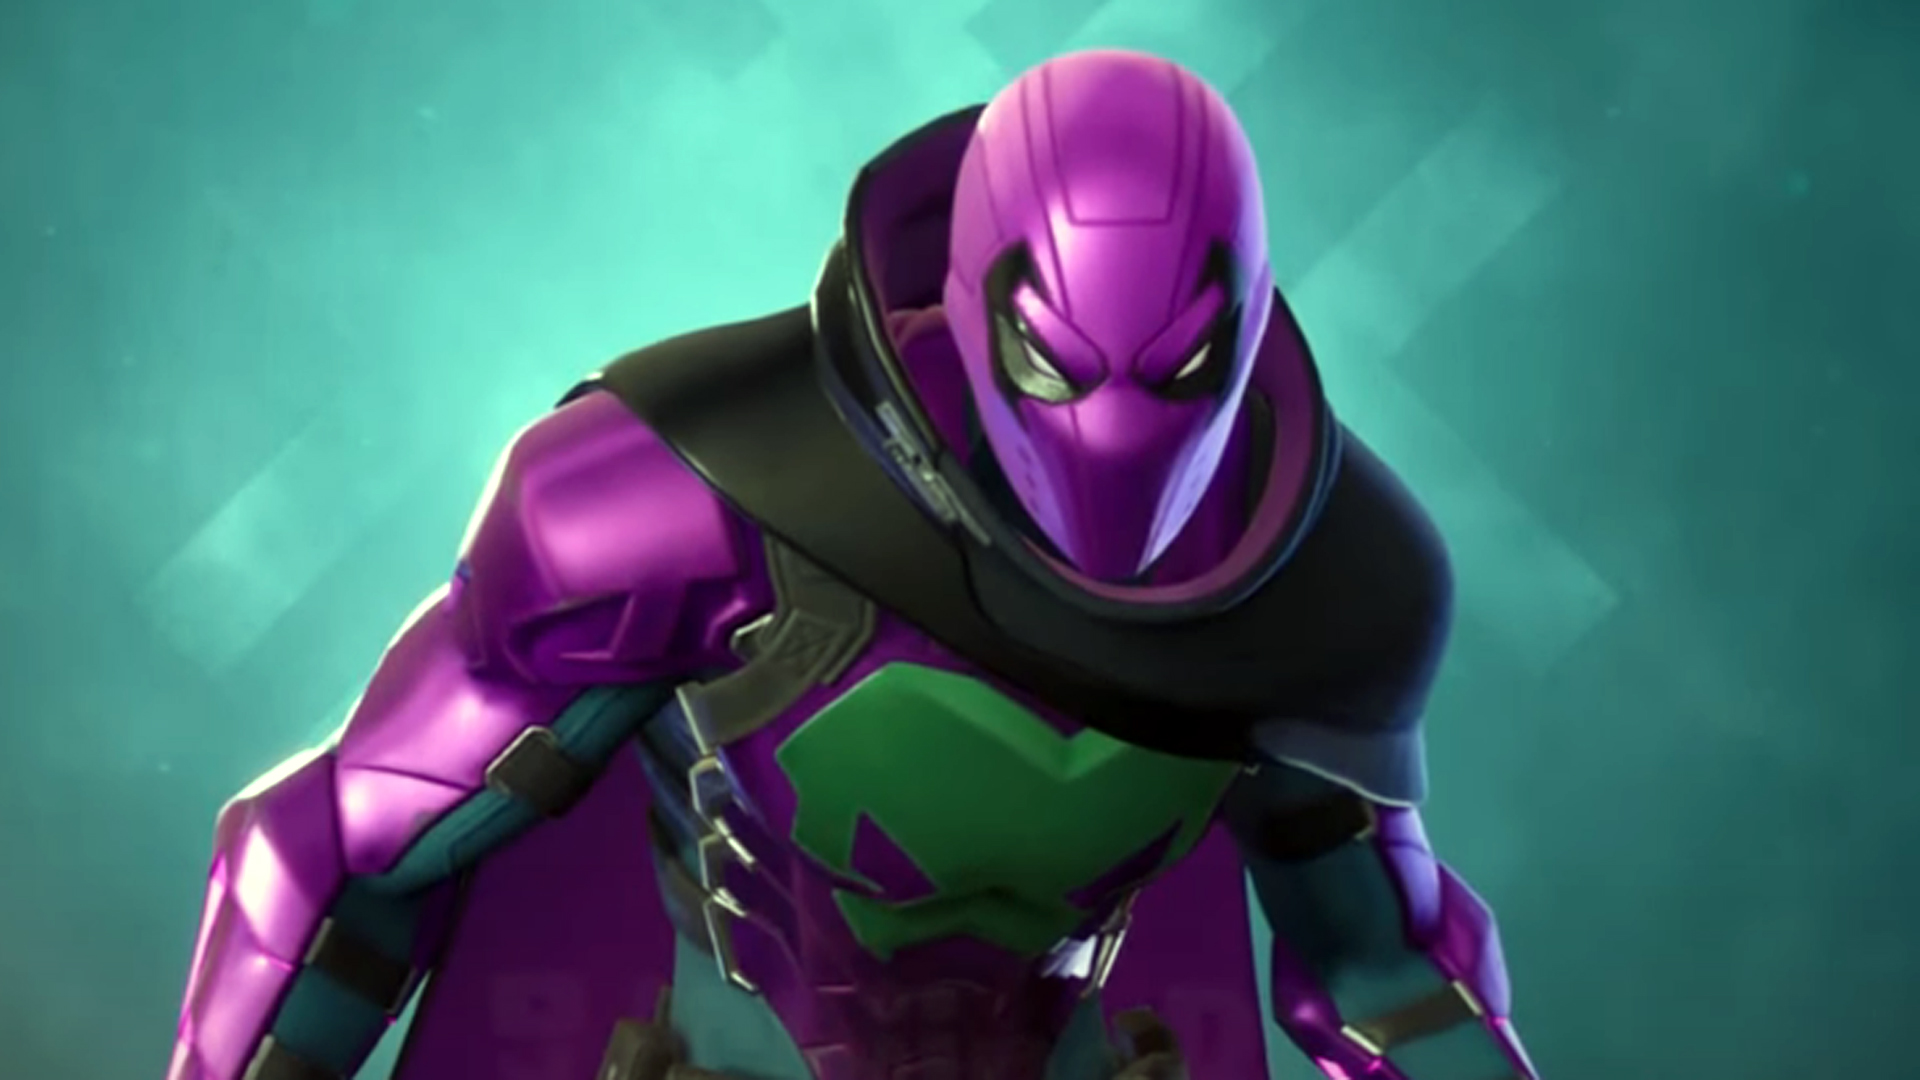 Epic adds Fortnite parkour but vaults Web-Shooters